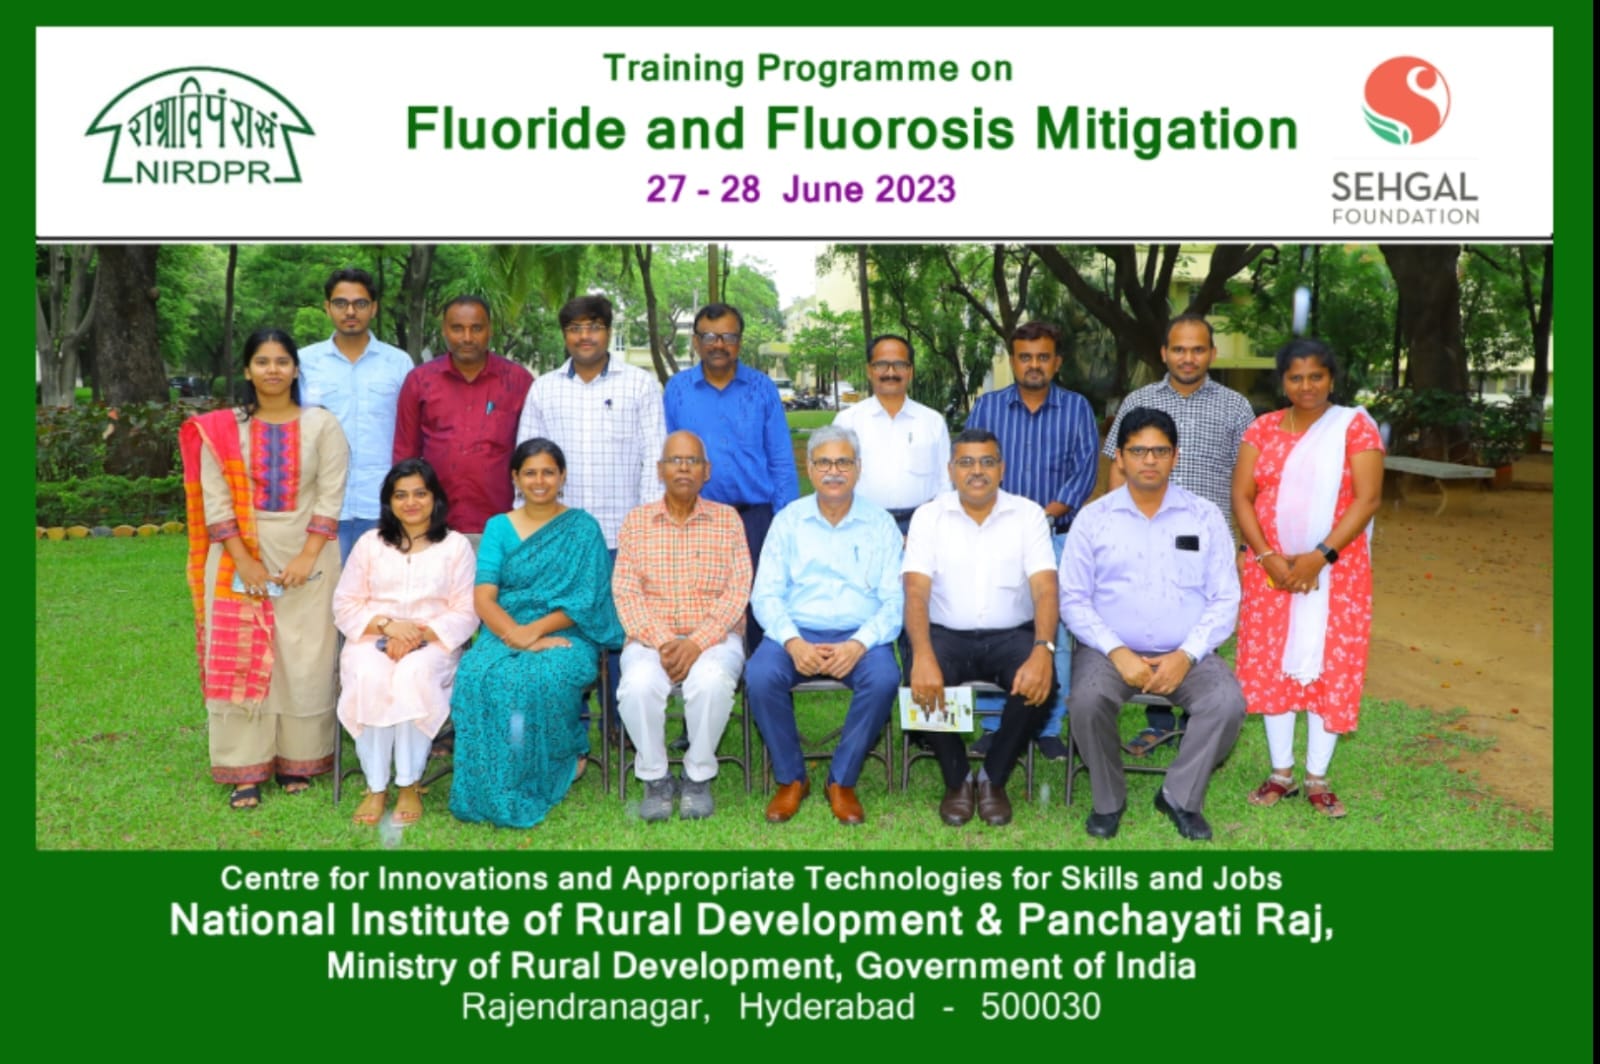 https://stratus.campaign-image.com/images/194670000030836004_zc_v1_1690281427757_fluoride_and_fluorosis_training.jpg